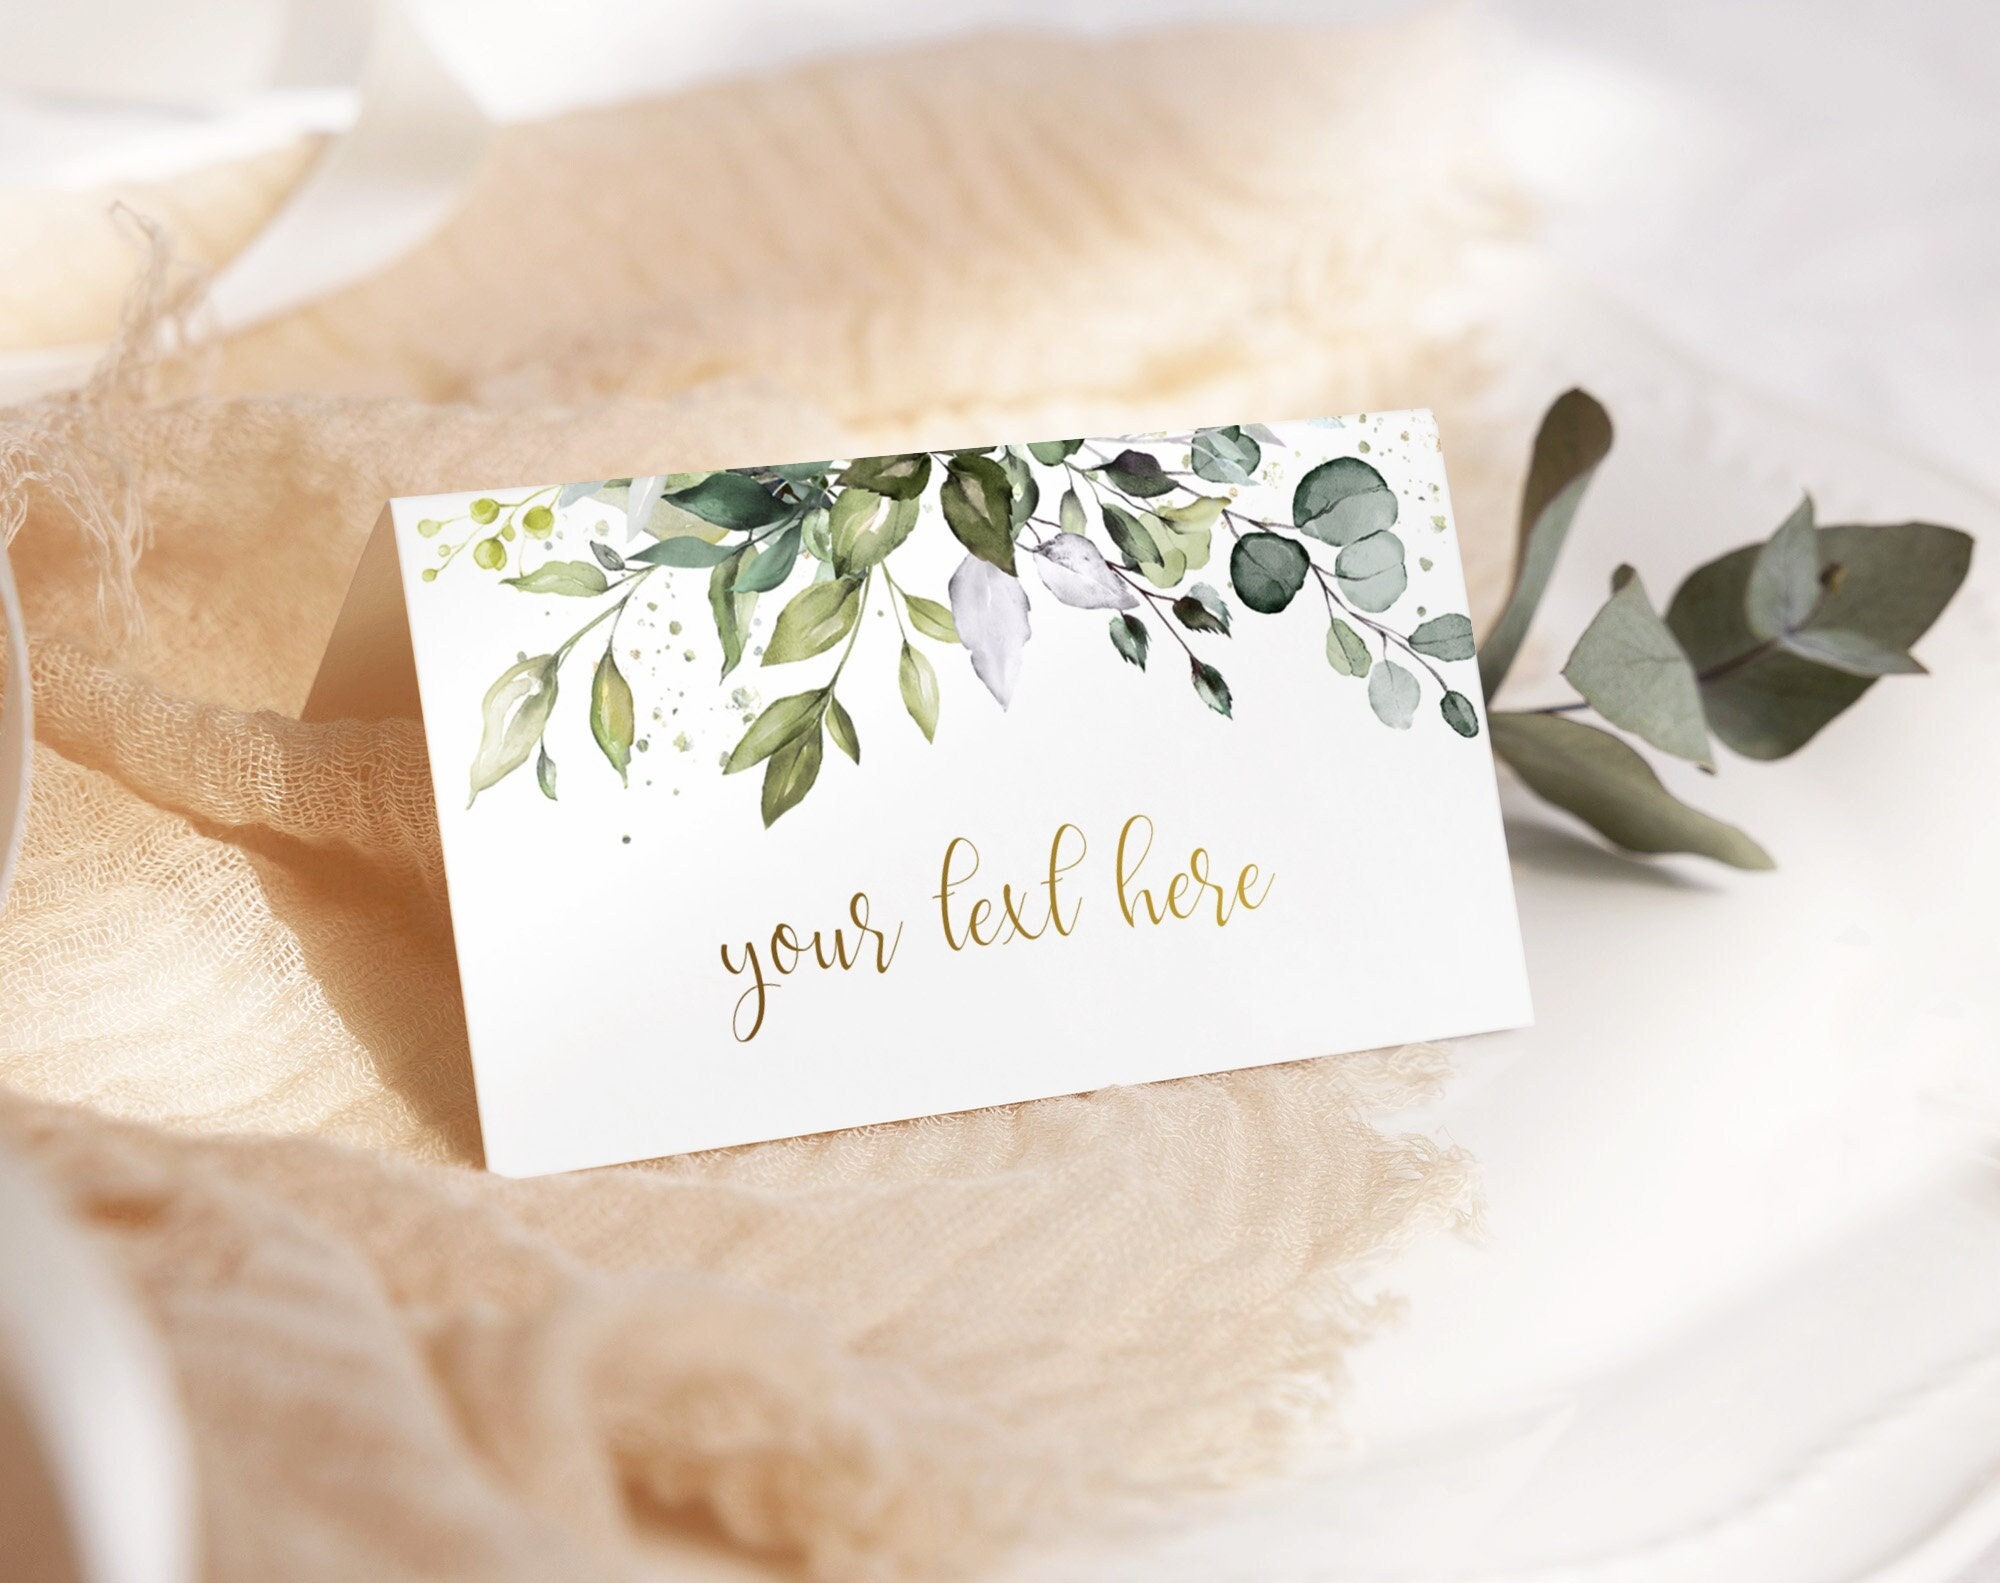 Editable Wedding Place Cards Template, Avery Wedding Name Cards, Greenery,  Instant Download, Eucalyptus, Printable Place Cards Rustic Boho 